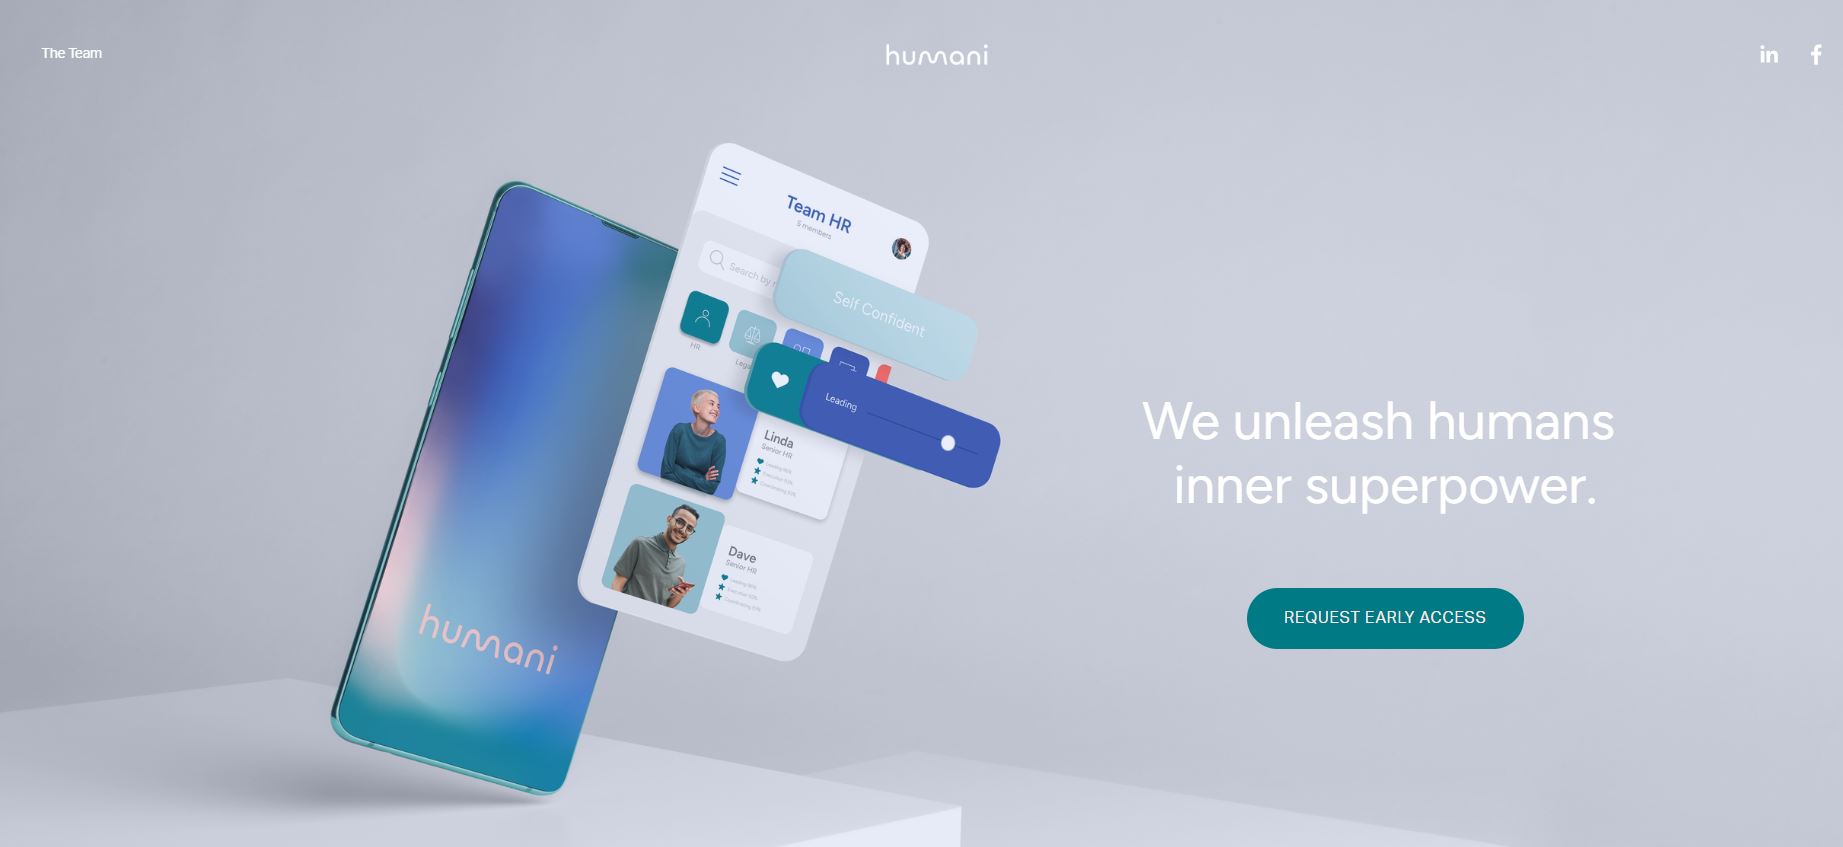 Humani, the technology startup, has recently raised €2 million in funding from investors